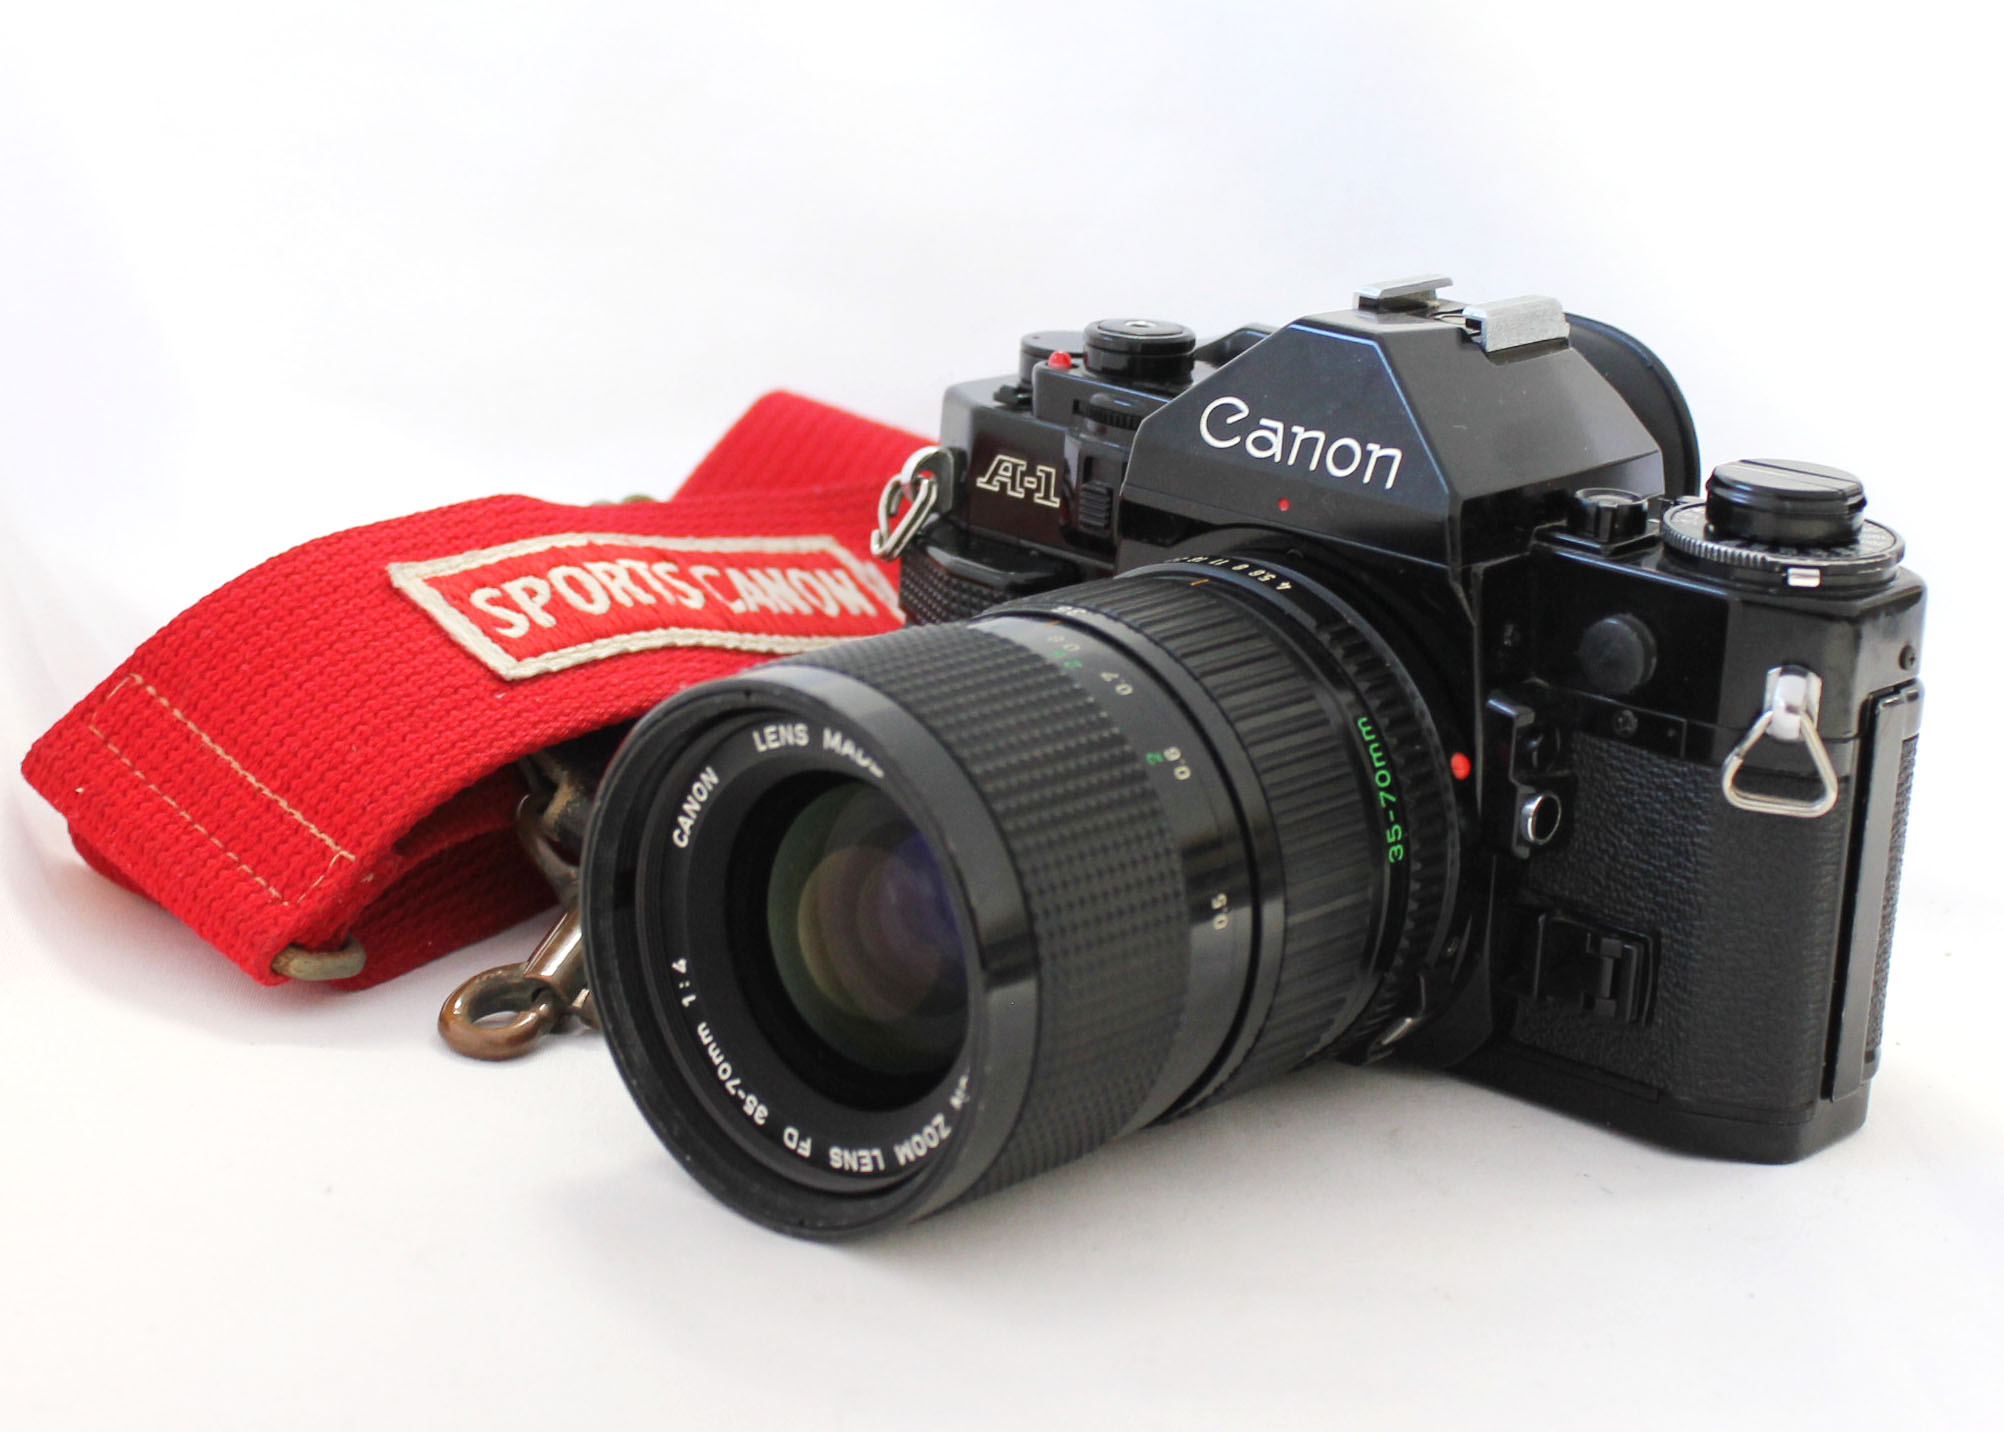 Japan Used Camera Shop | Canon A-1 35mm SLR Film Camera with New FD 35-70mm F/4 Zoom Lens from Japan